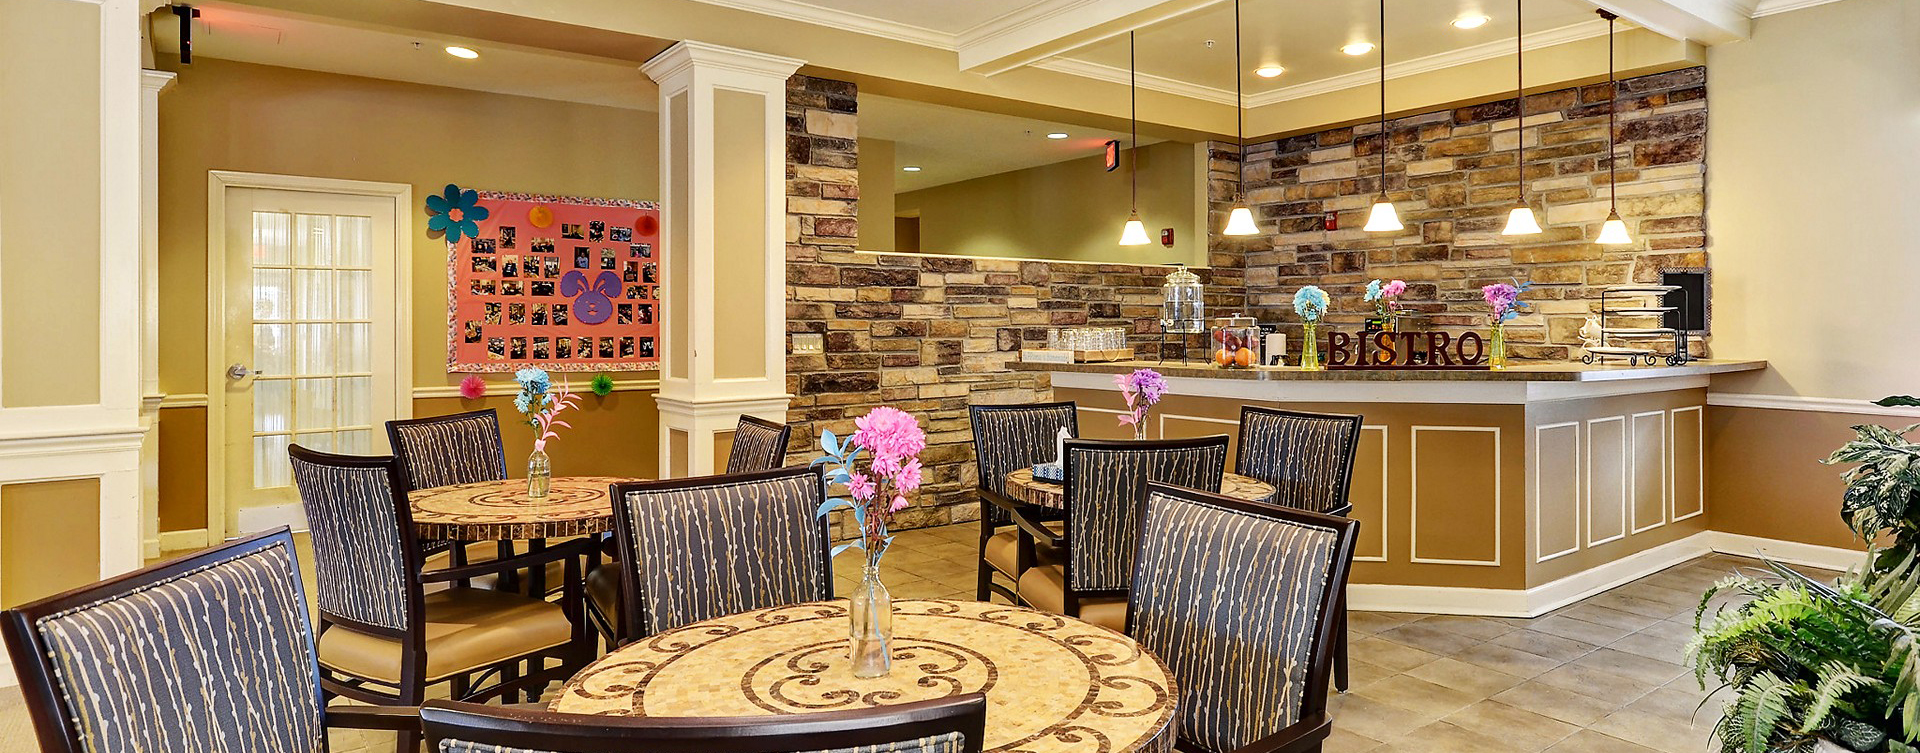 We’re serving up snacks, beverages and service around the clock in the bistro at Bickford of Crystal Lake